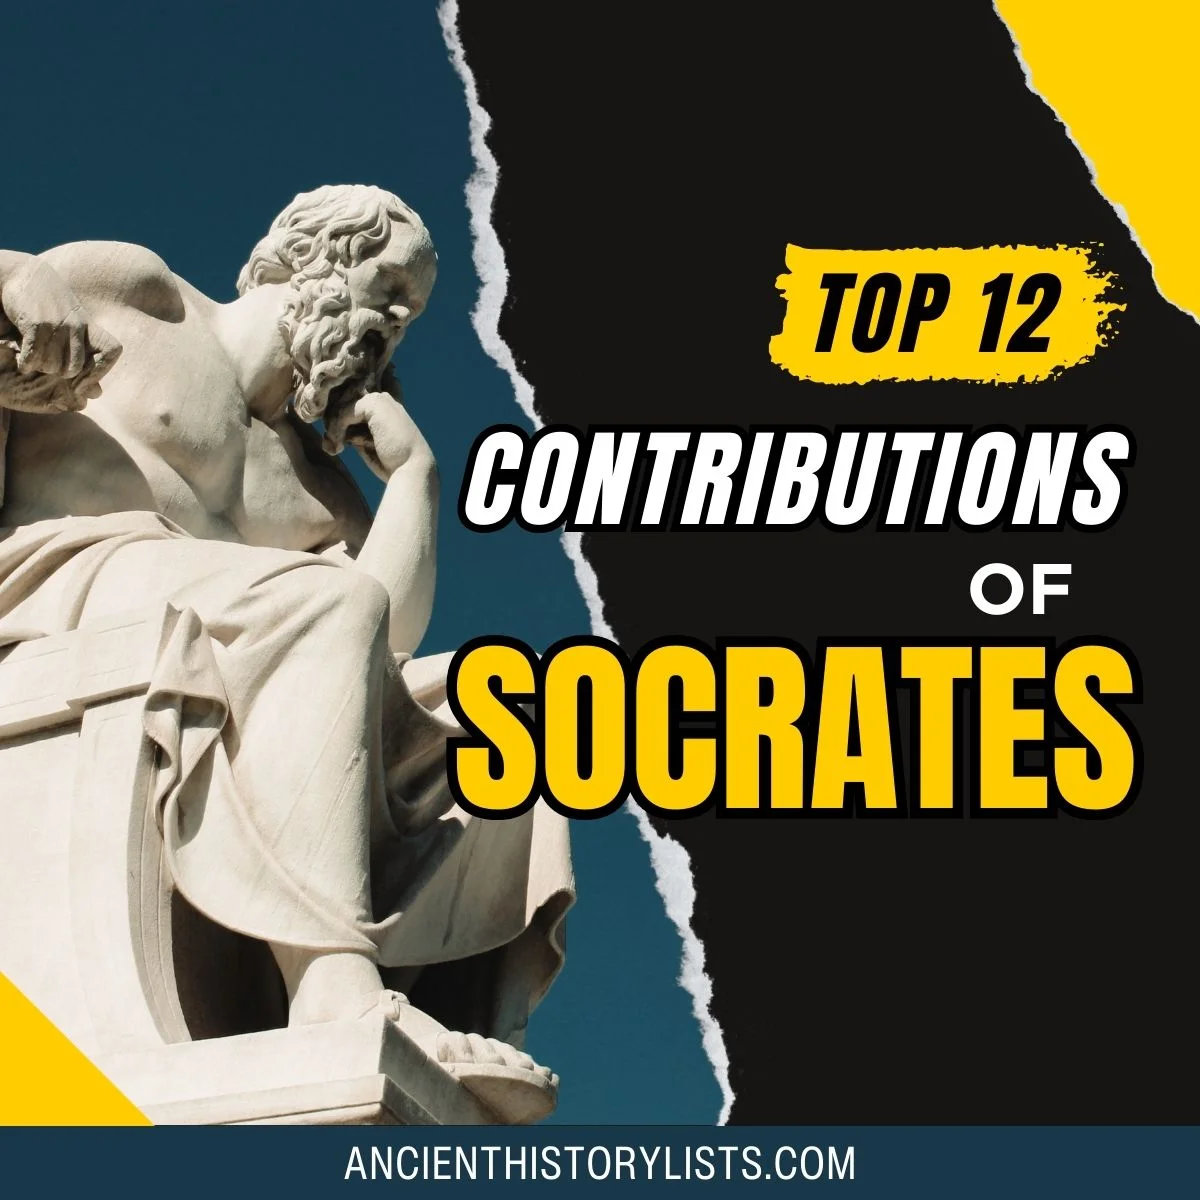 Contributions of Socrates